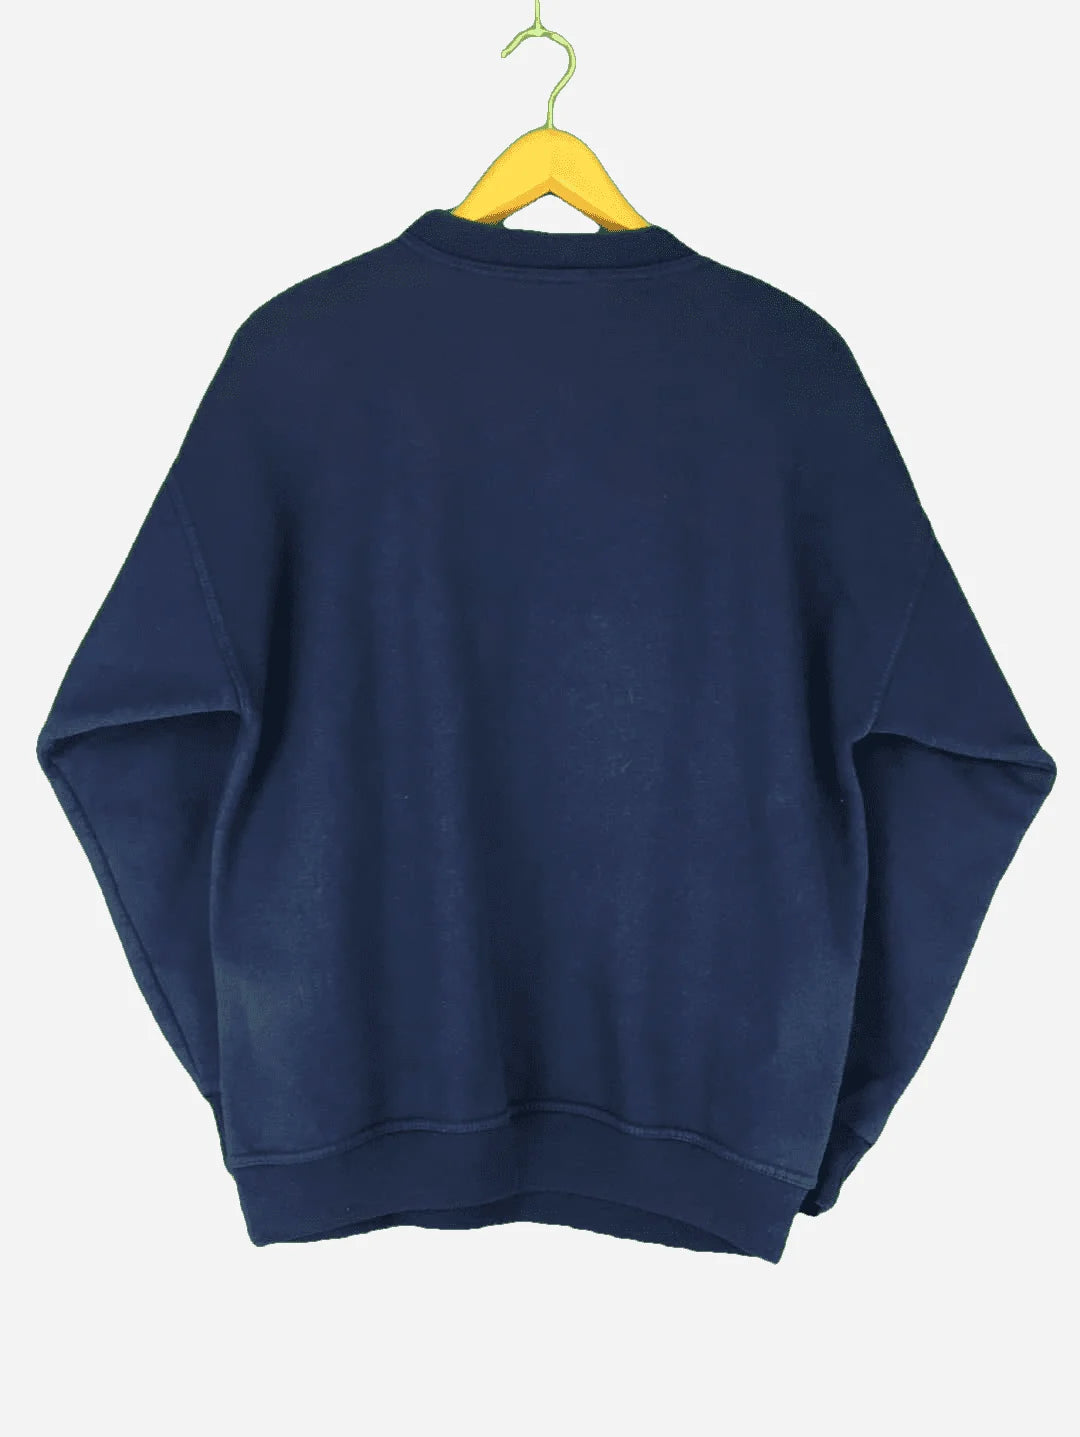 Northern Reflections "Duck" Sweater (L)